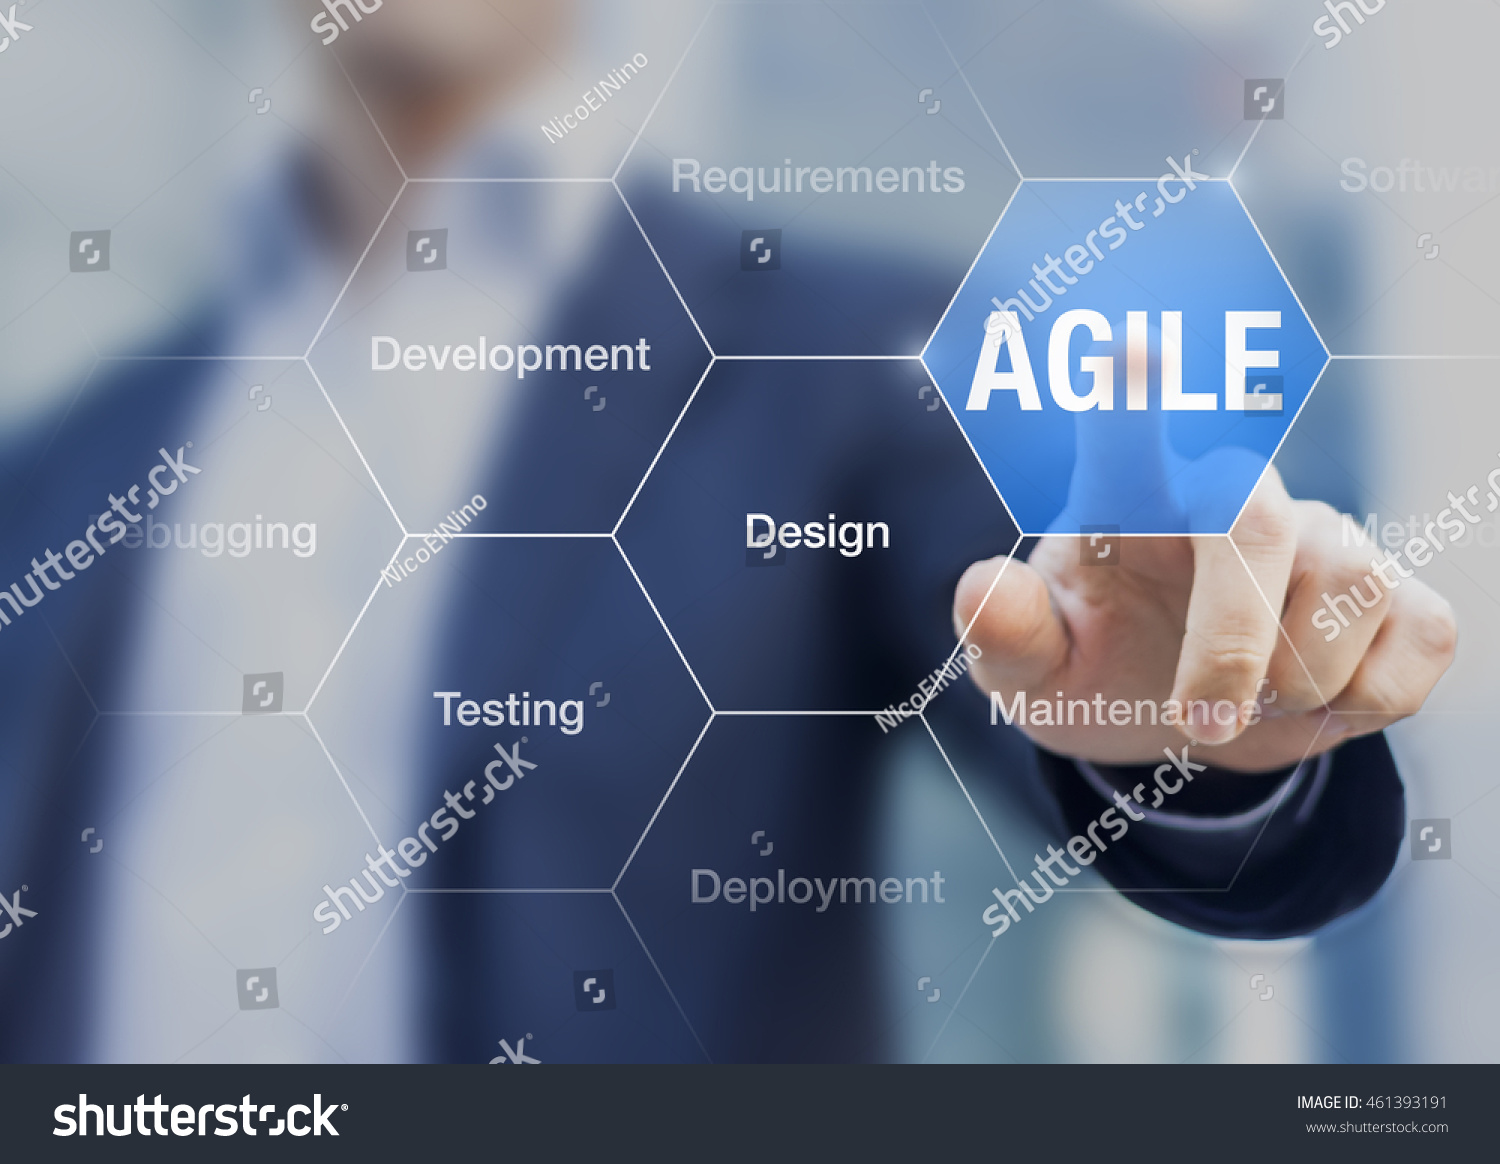 Agile software development principle on the screen with businessman touching button, concept about scrum, iterative methods #461393191